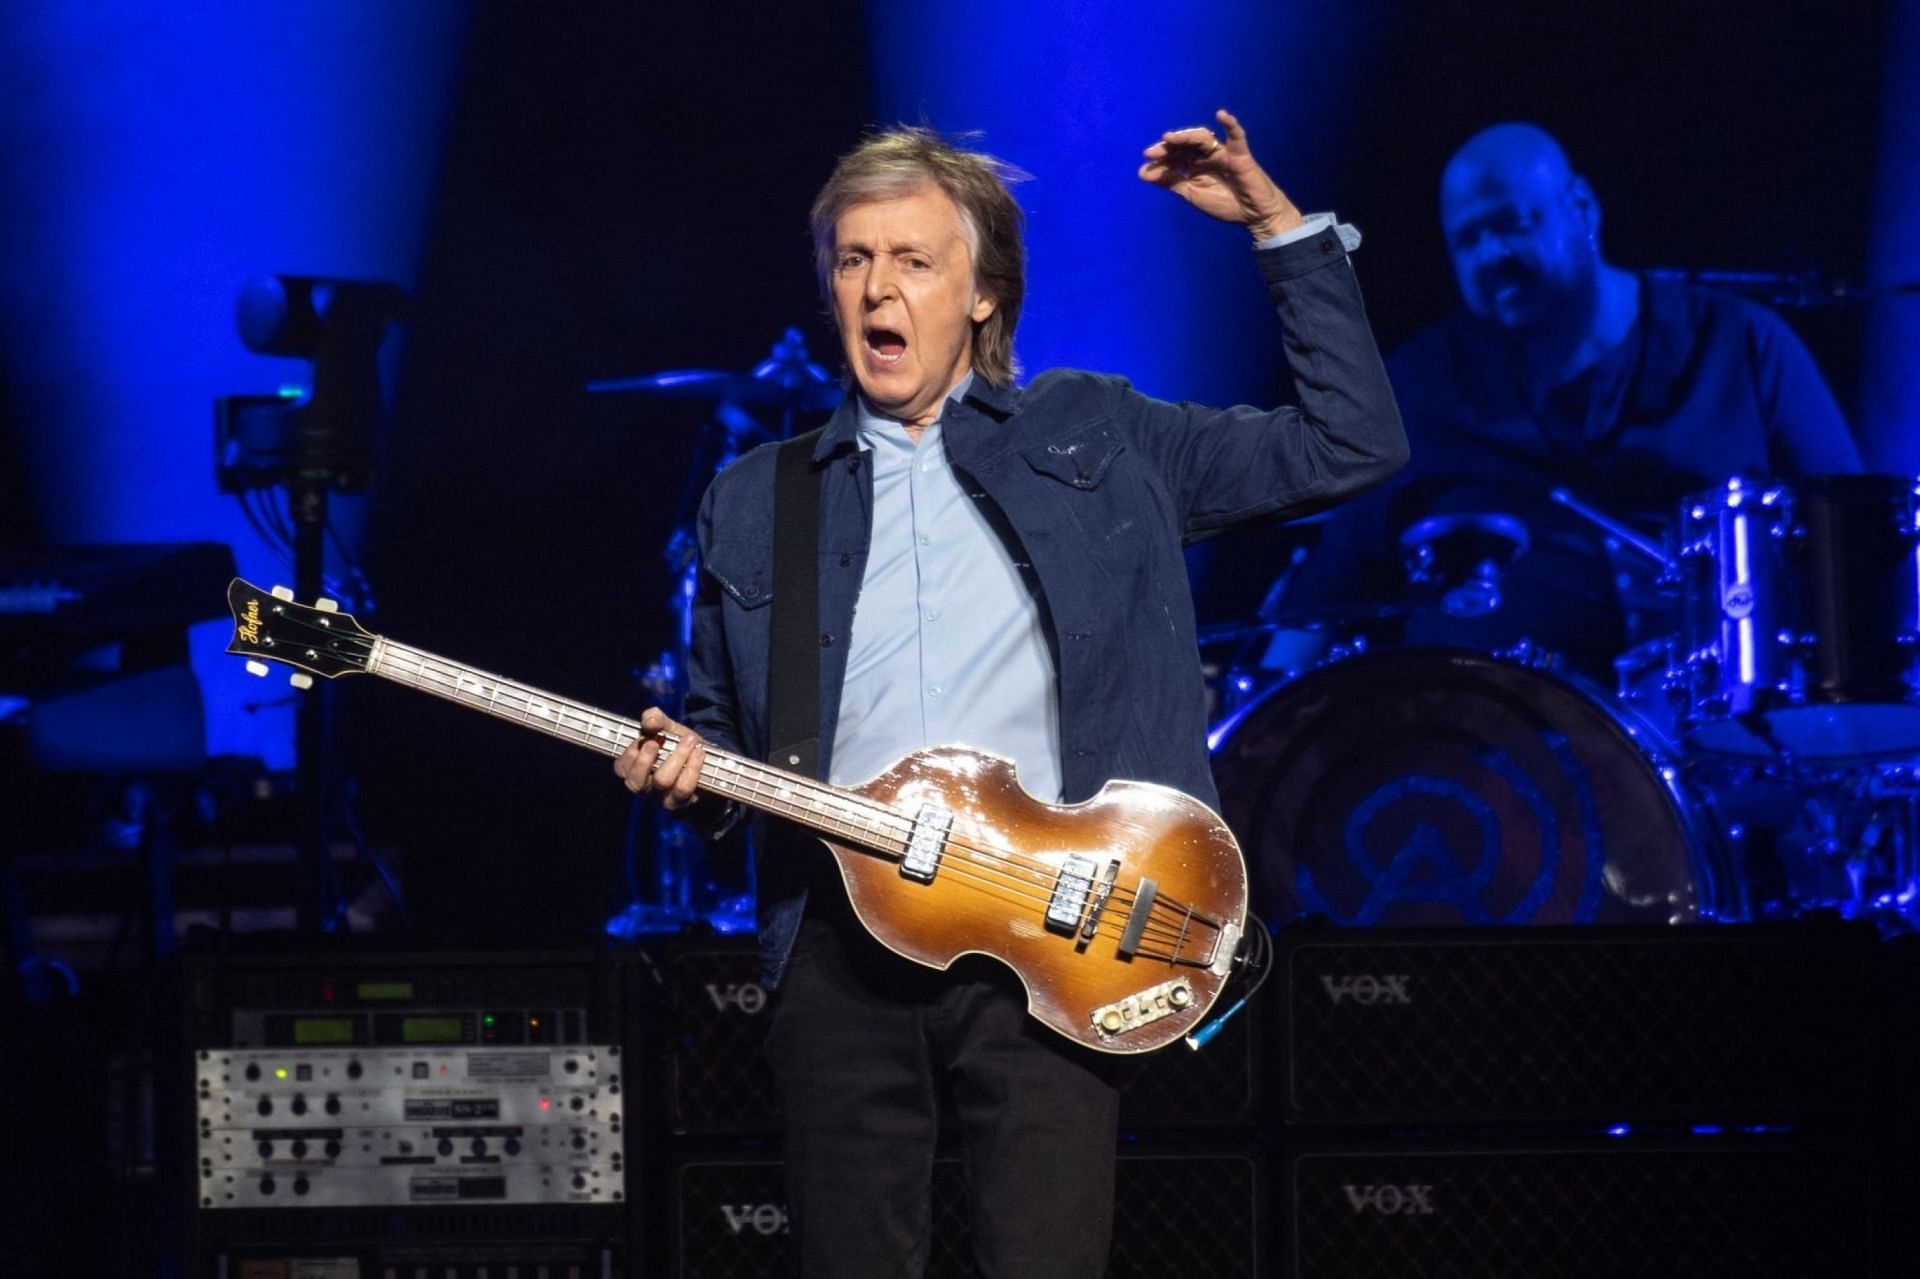 Paul McCartney at The SSE Hydro  in Glasgow, Scotland on December 14, 2018 (Image via Getty Images)